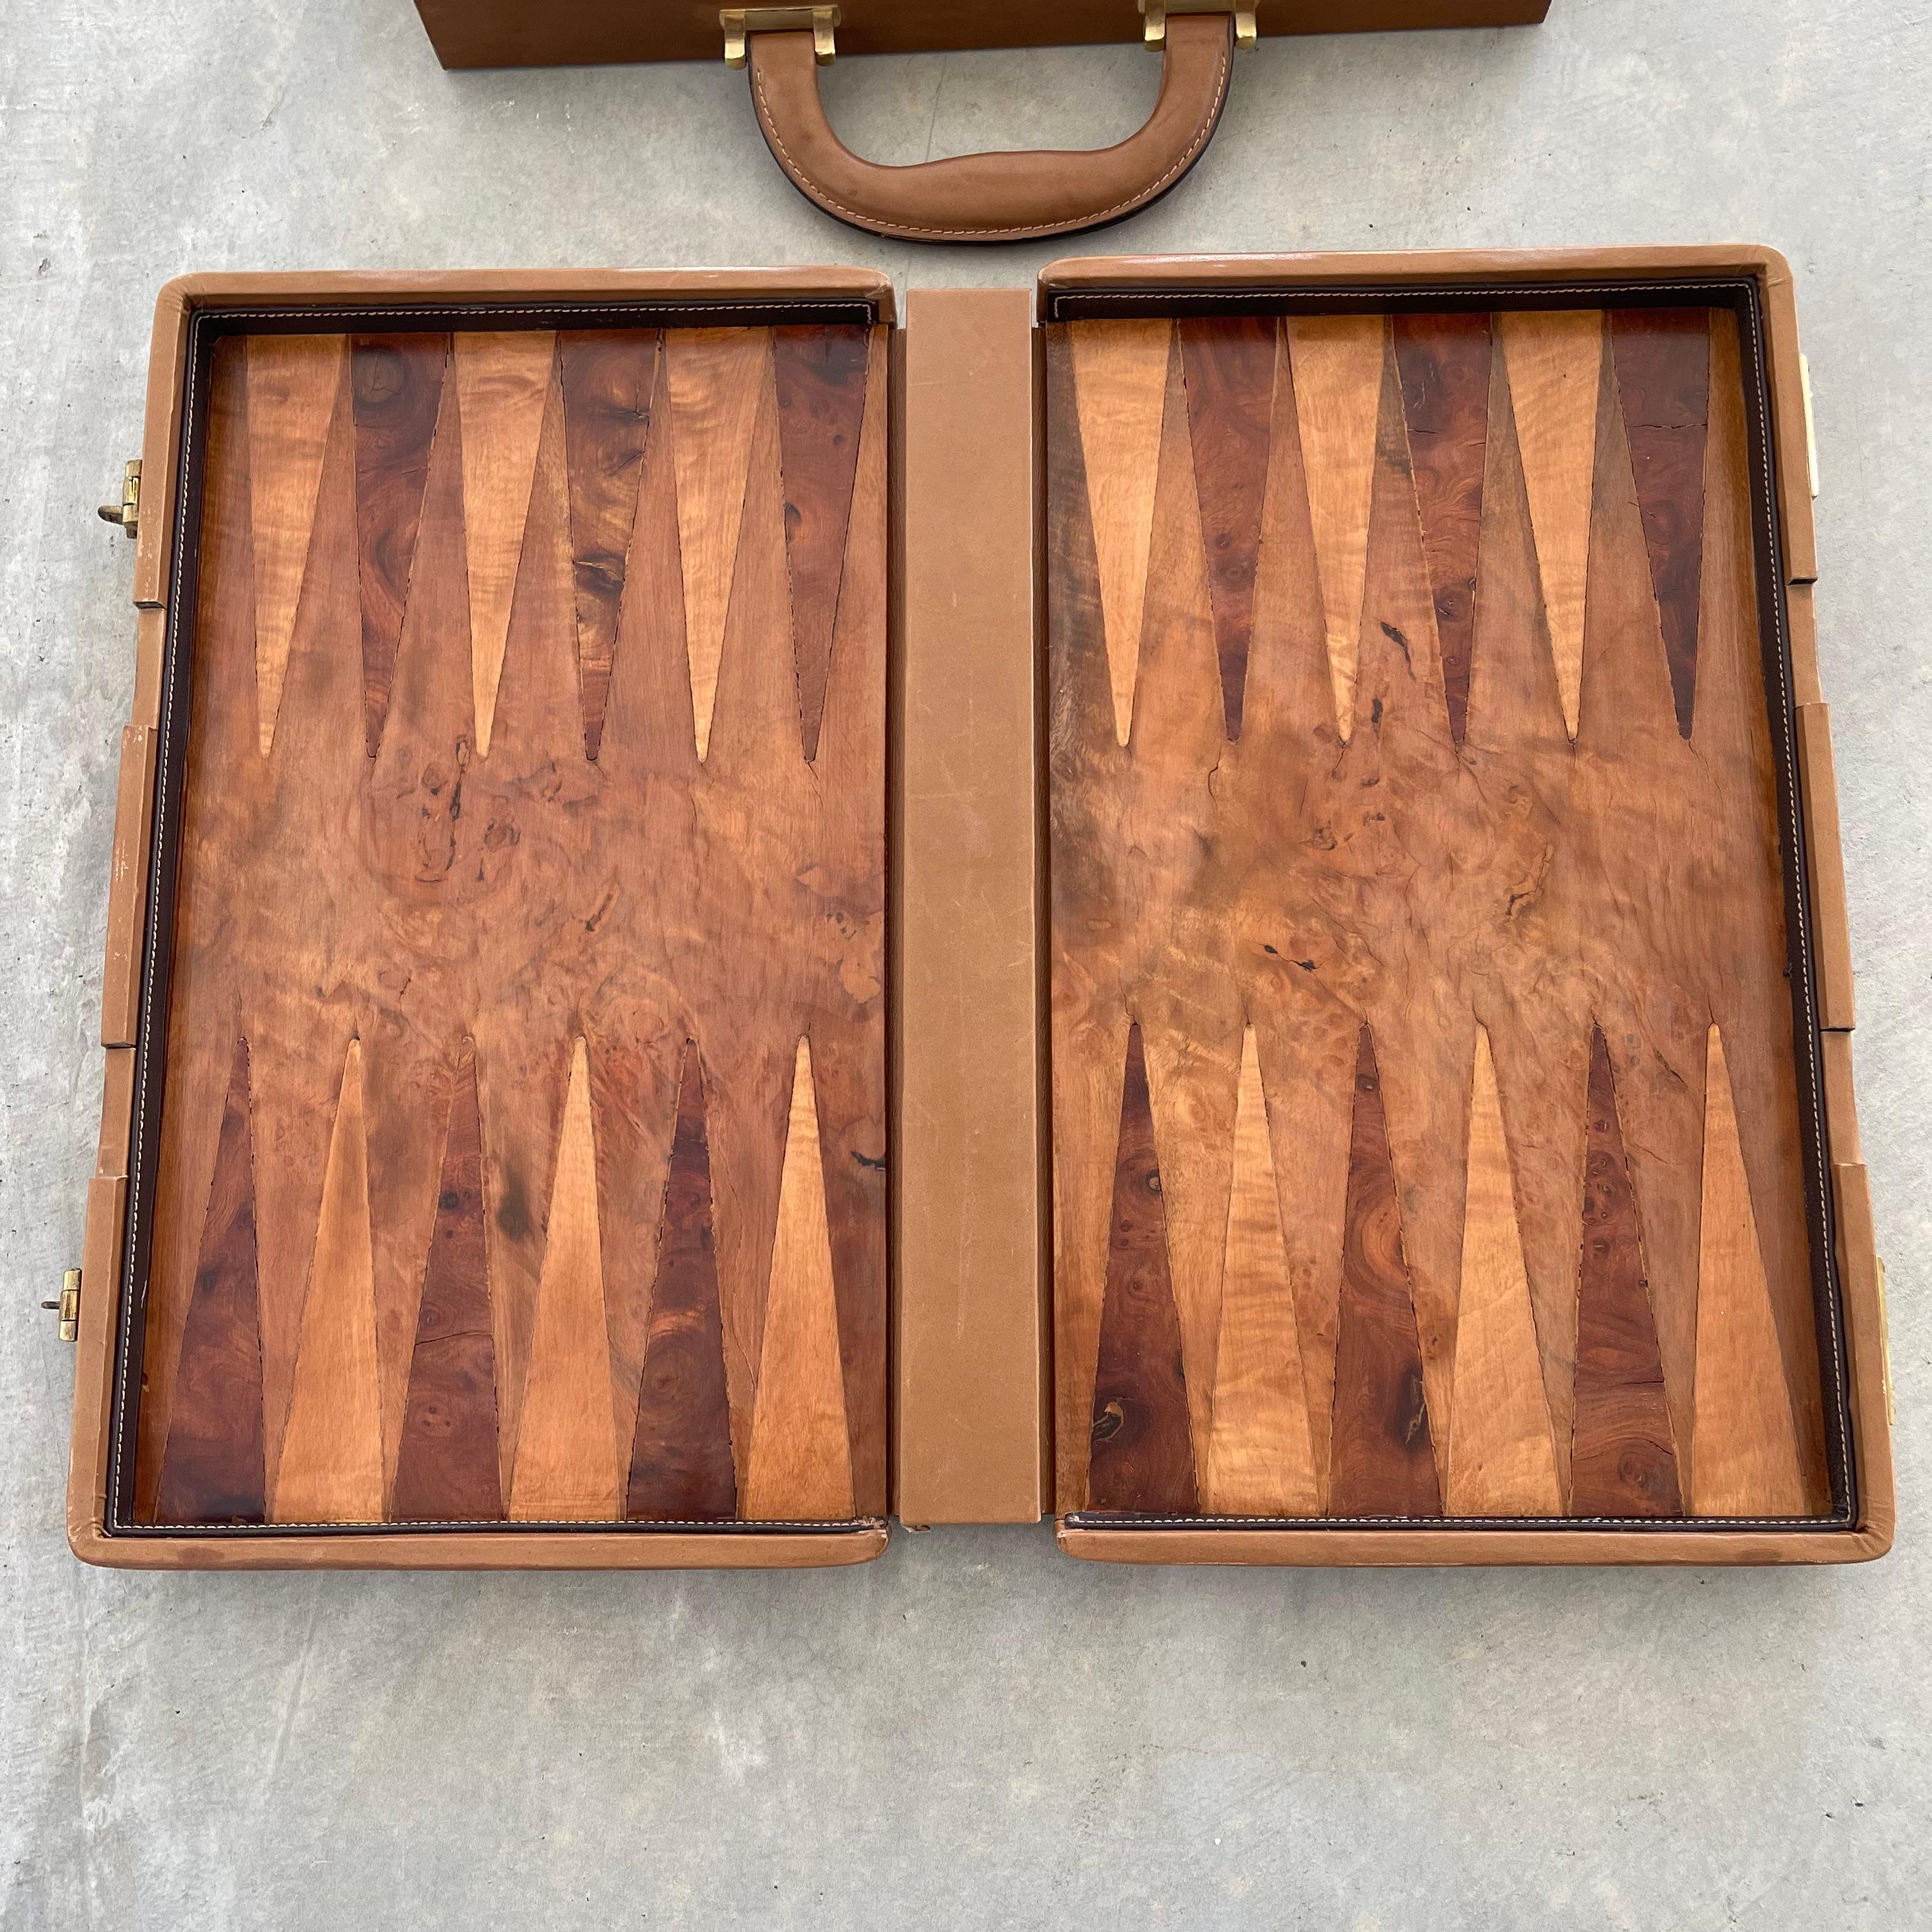 Gucci Wood and Leather Backgammon Set, 1970s Italy For Sale 10